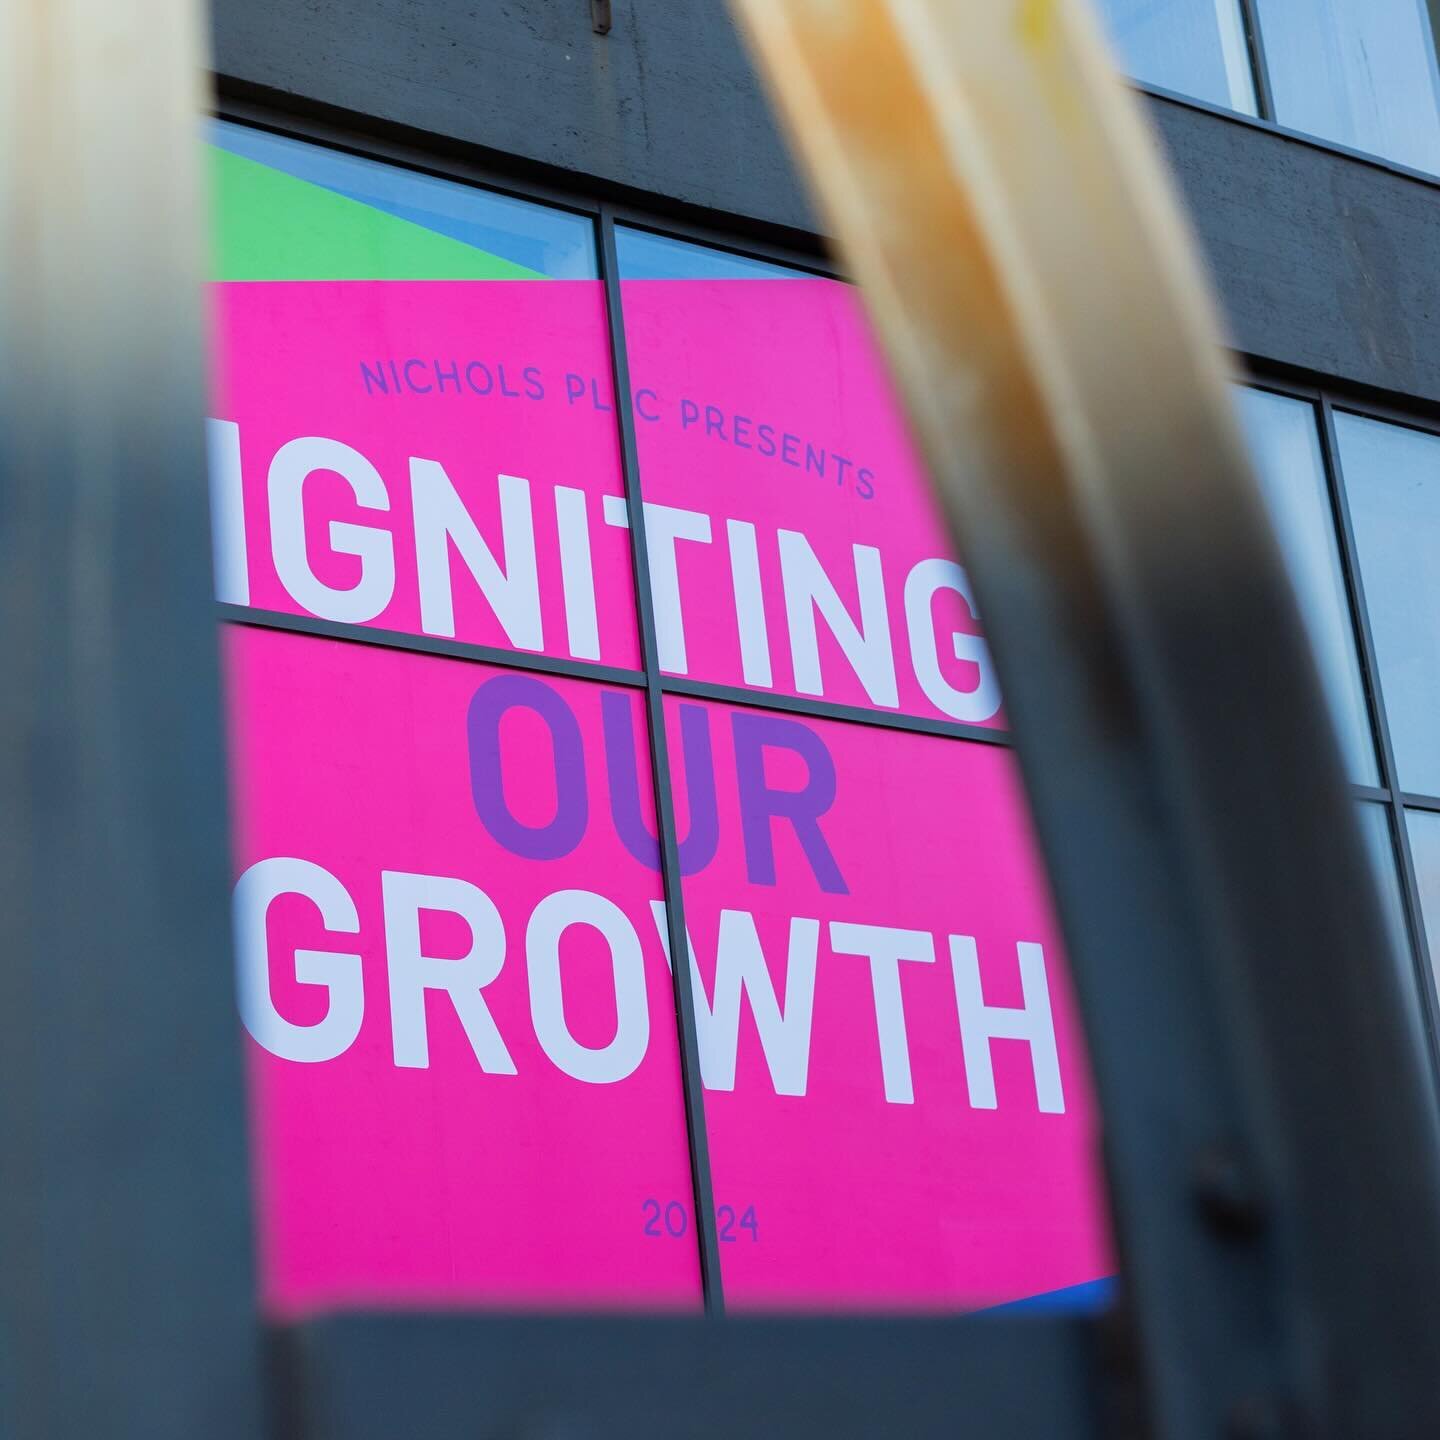 Igniting our&hellip;2024!
Imagined with energy, created with love, delivered with WILD &ndash; this engagement conference and recognition awards event for our client Nichols plc was ALL of that!
 
From a punchy creative concept to vast complex delive